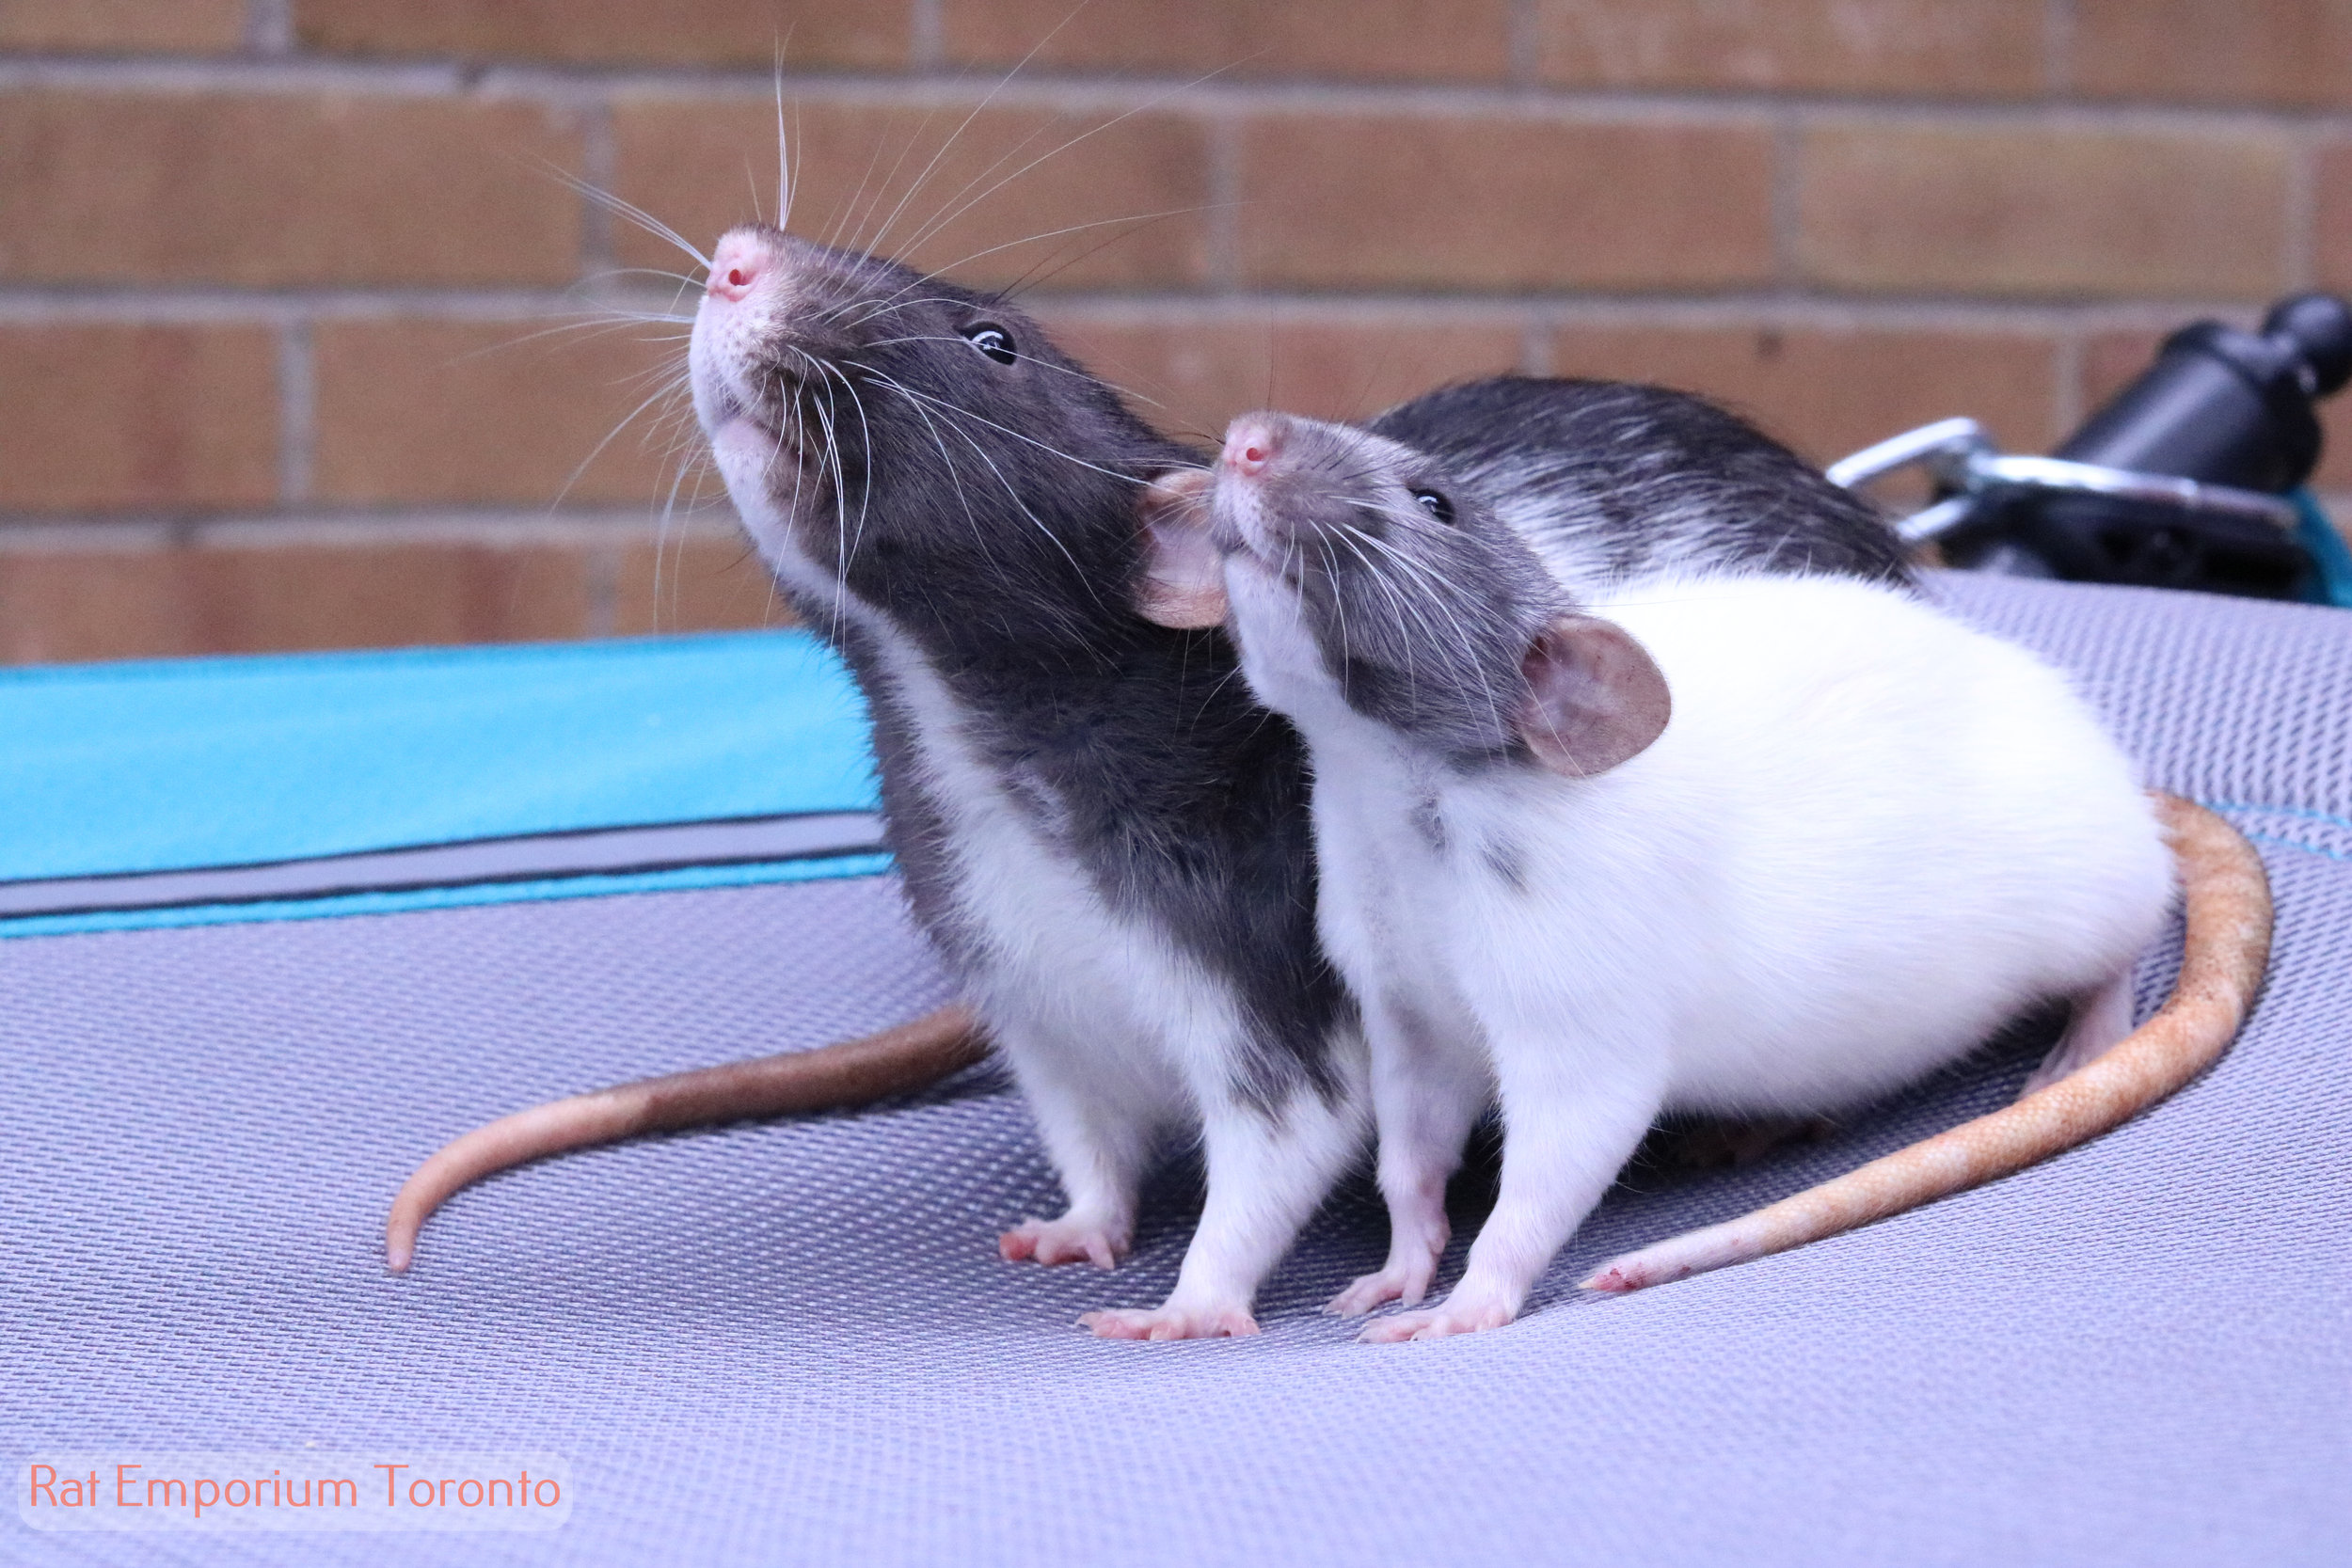 black and white variegated dumbo rat - born and raised at the Rat Emporium Toronto - rat breeder Toronto - adopt pet rats - learn about rats